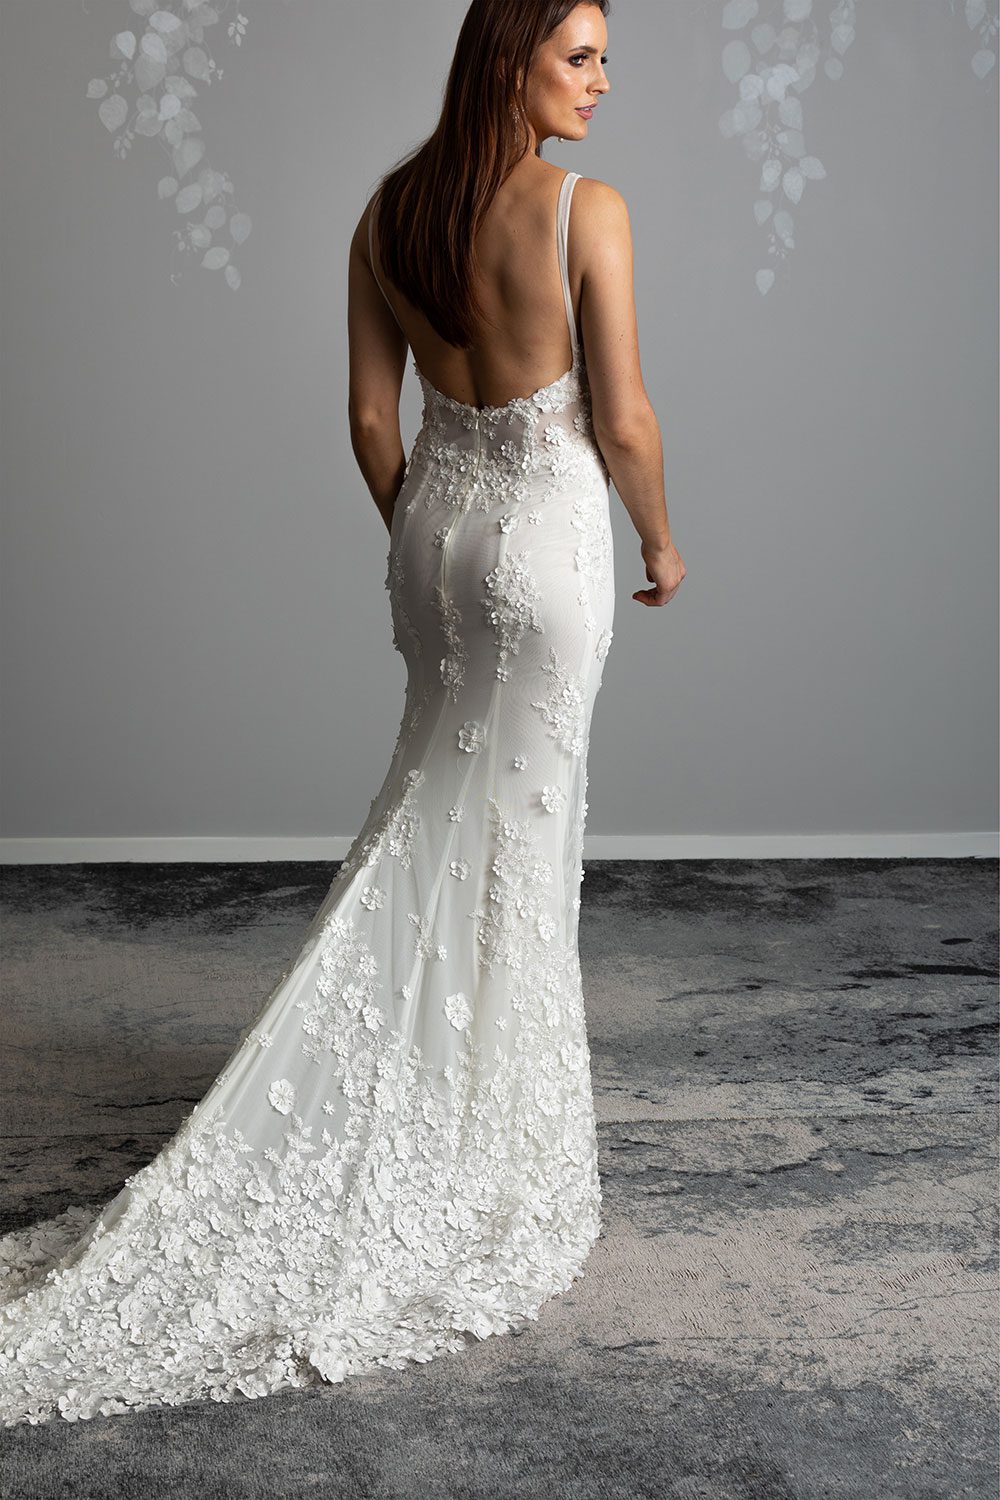 E'more Wedding gown from Vinka Design - This stunning lace wedding gown is hand sewn with a fully beaded 3D flower embroidery. Structured and boned bodice with scoop neckline in the front and low back. Stretch fit skirt flares into full lace train. Full length view of back of the dress with low back and long lace train